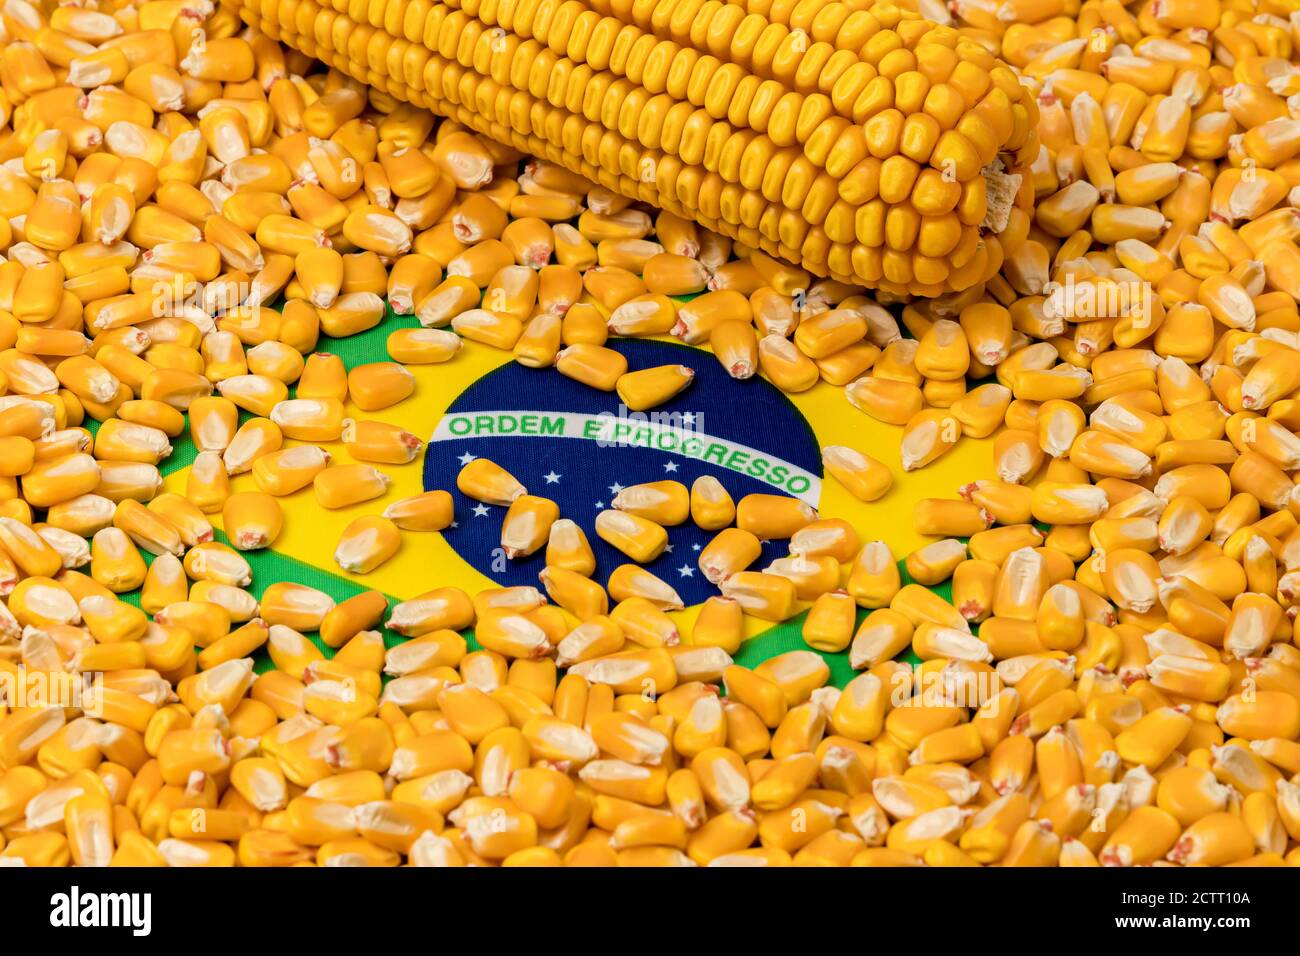 Flag of Brazil covered in corn kernels. Concept of South America and Brazilian agriculture imports, exports, trade war, agreement and tariffs. Stock Photo